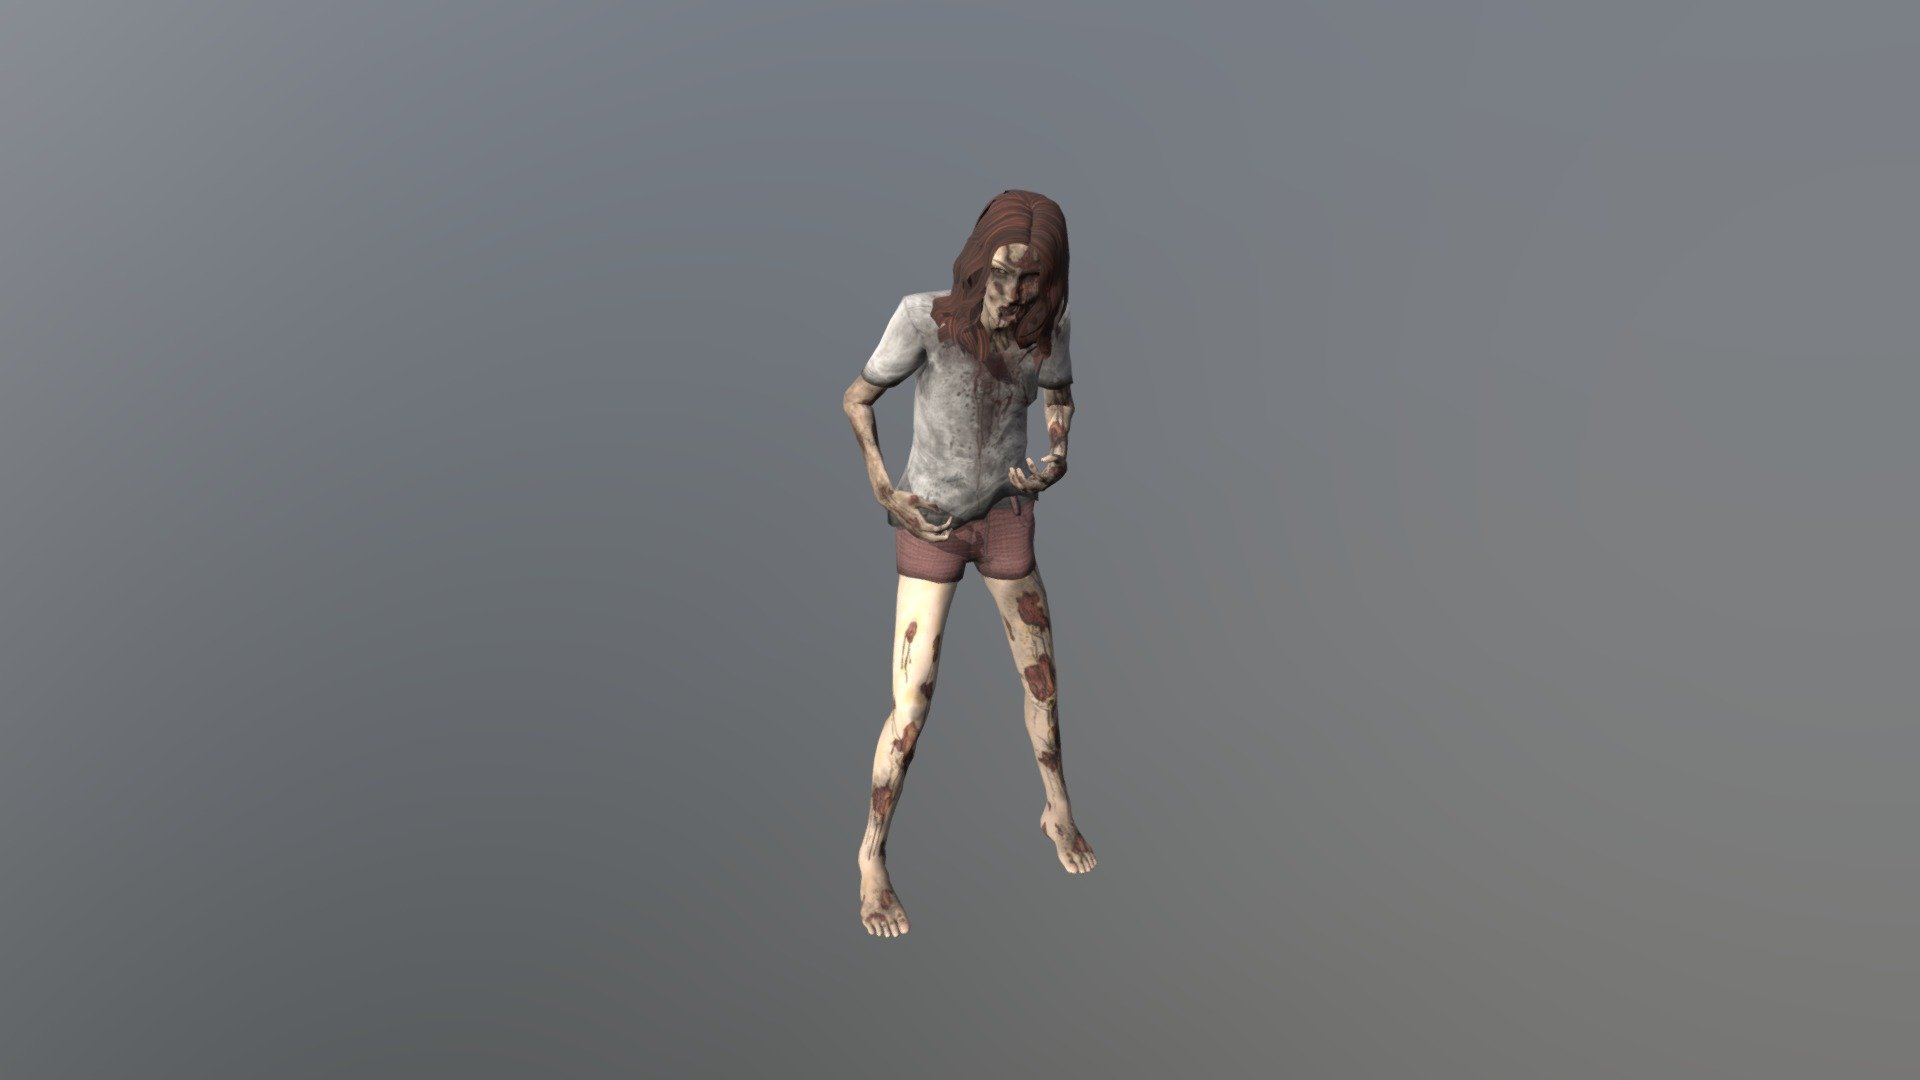 Assignment for 3D Game Art Development.
All model and references are used on educational purposes only.

Model: http://sketchfab.com/3d-models/fuse-female-zombie-1-98415df5d3124381a46ccef5c2e02b71
Reference: http://www.youtube.com/watch?v=747ZIzgrres&amp;ab_channel=VladimirYarmolik - Zombie Hard Attack Animation - Download Free 3D model by Leong Ji Fei (@JiFeiii) 3d model